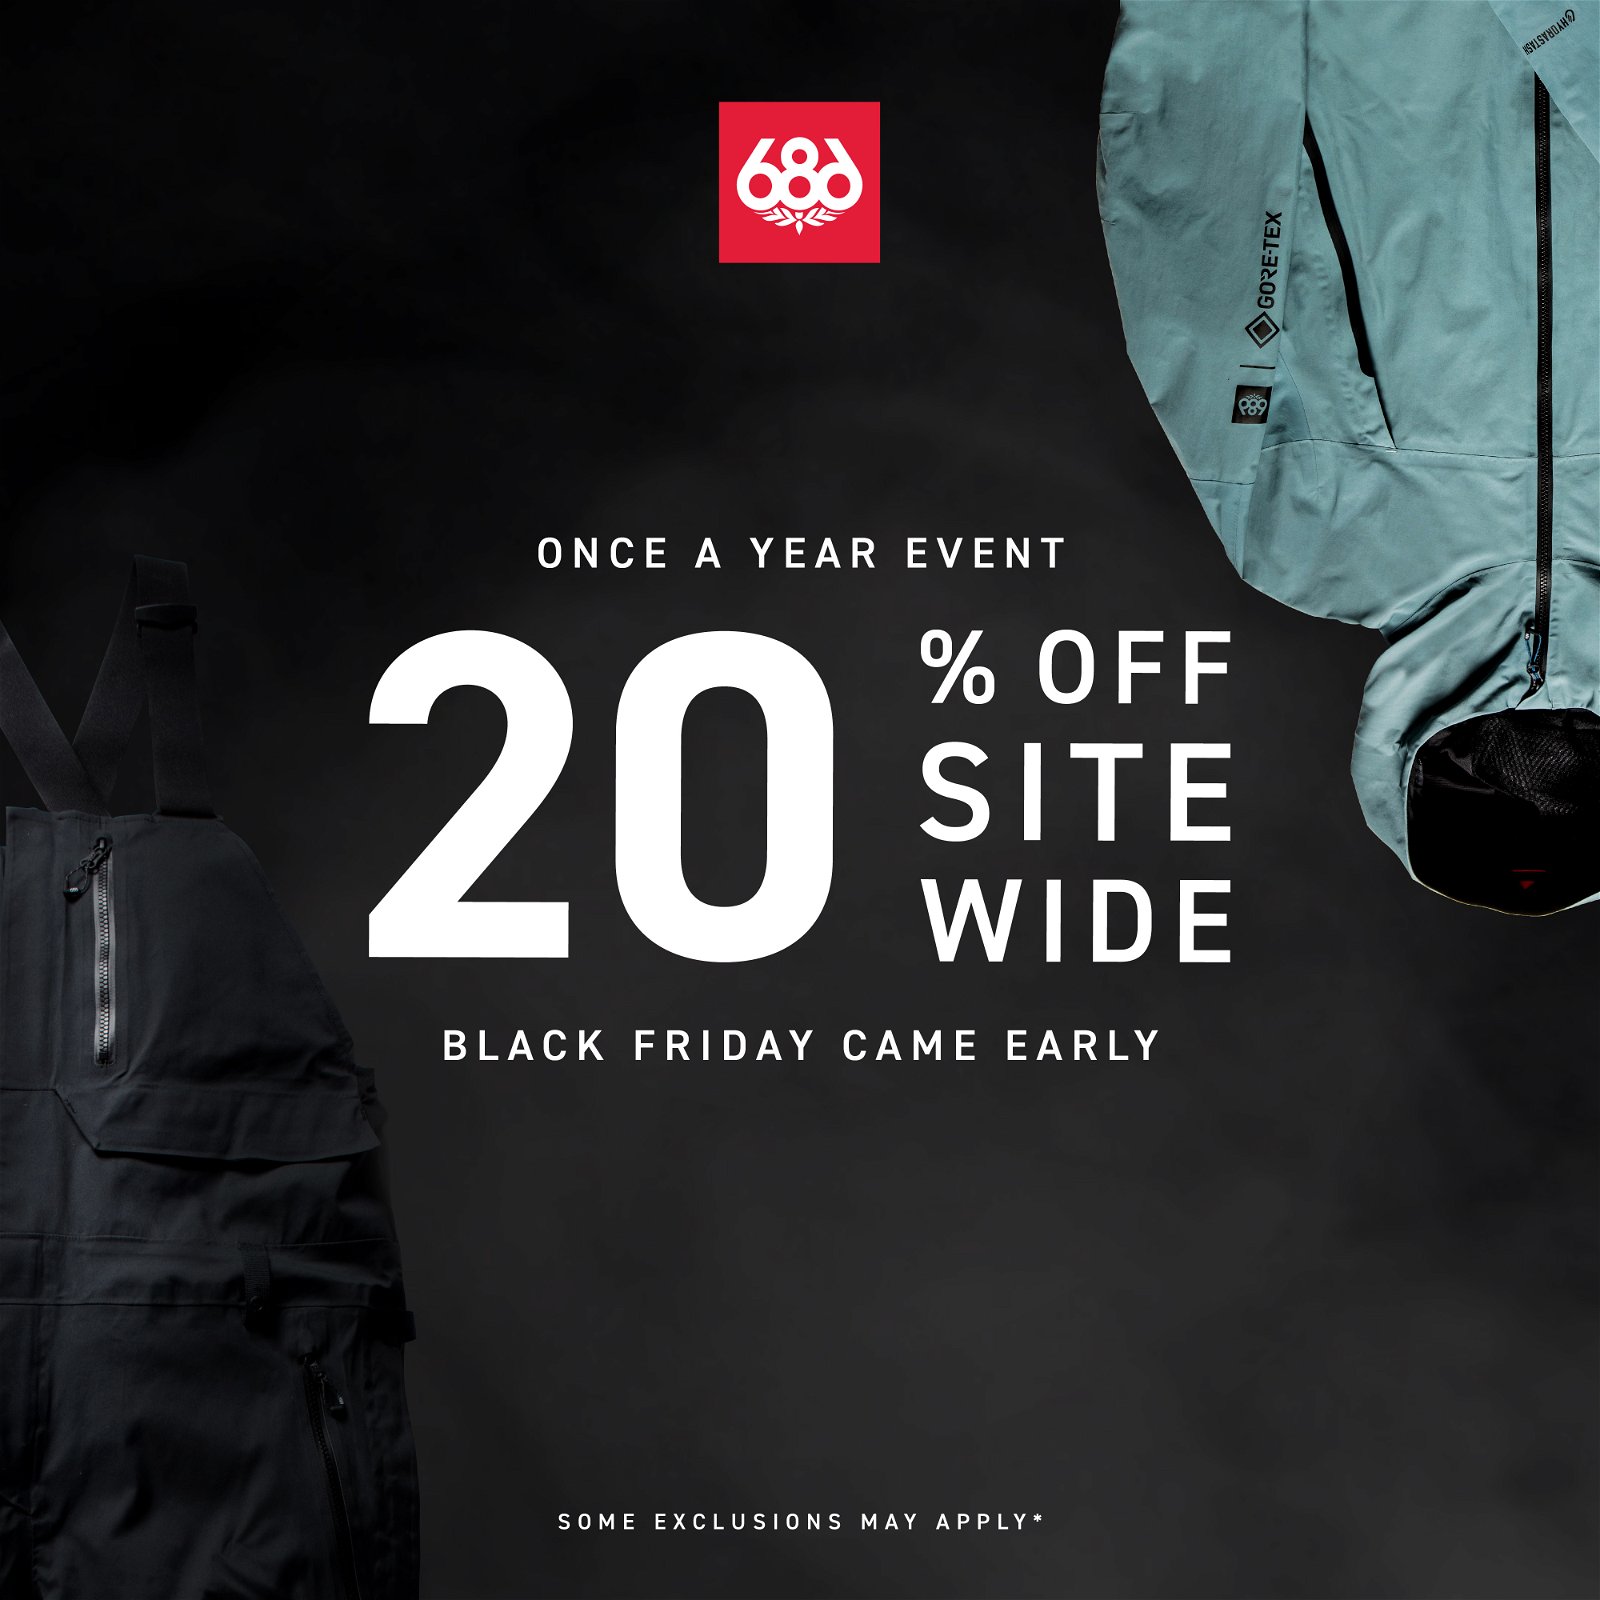 686: It's On! Black Friday Came | 20% Off Site Wide Milled